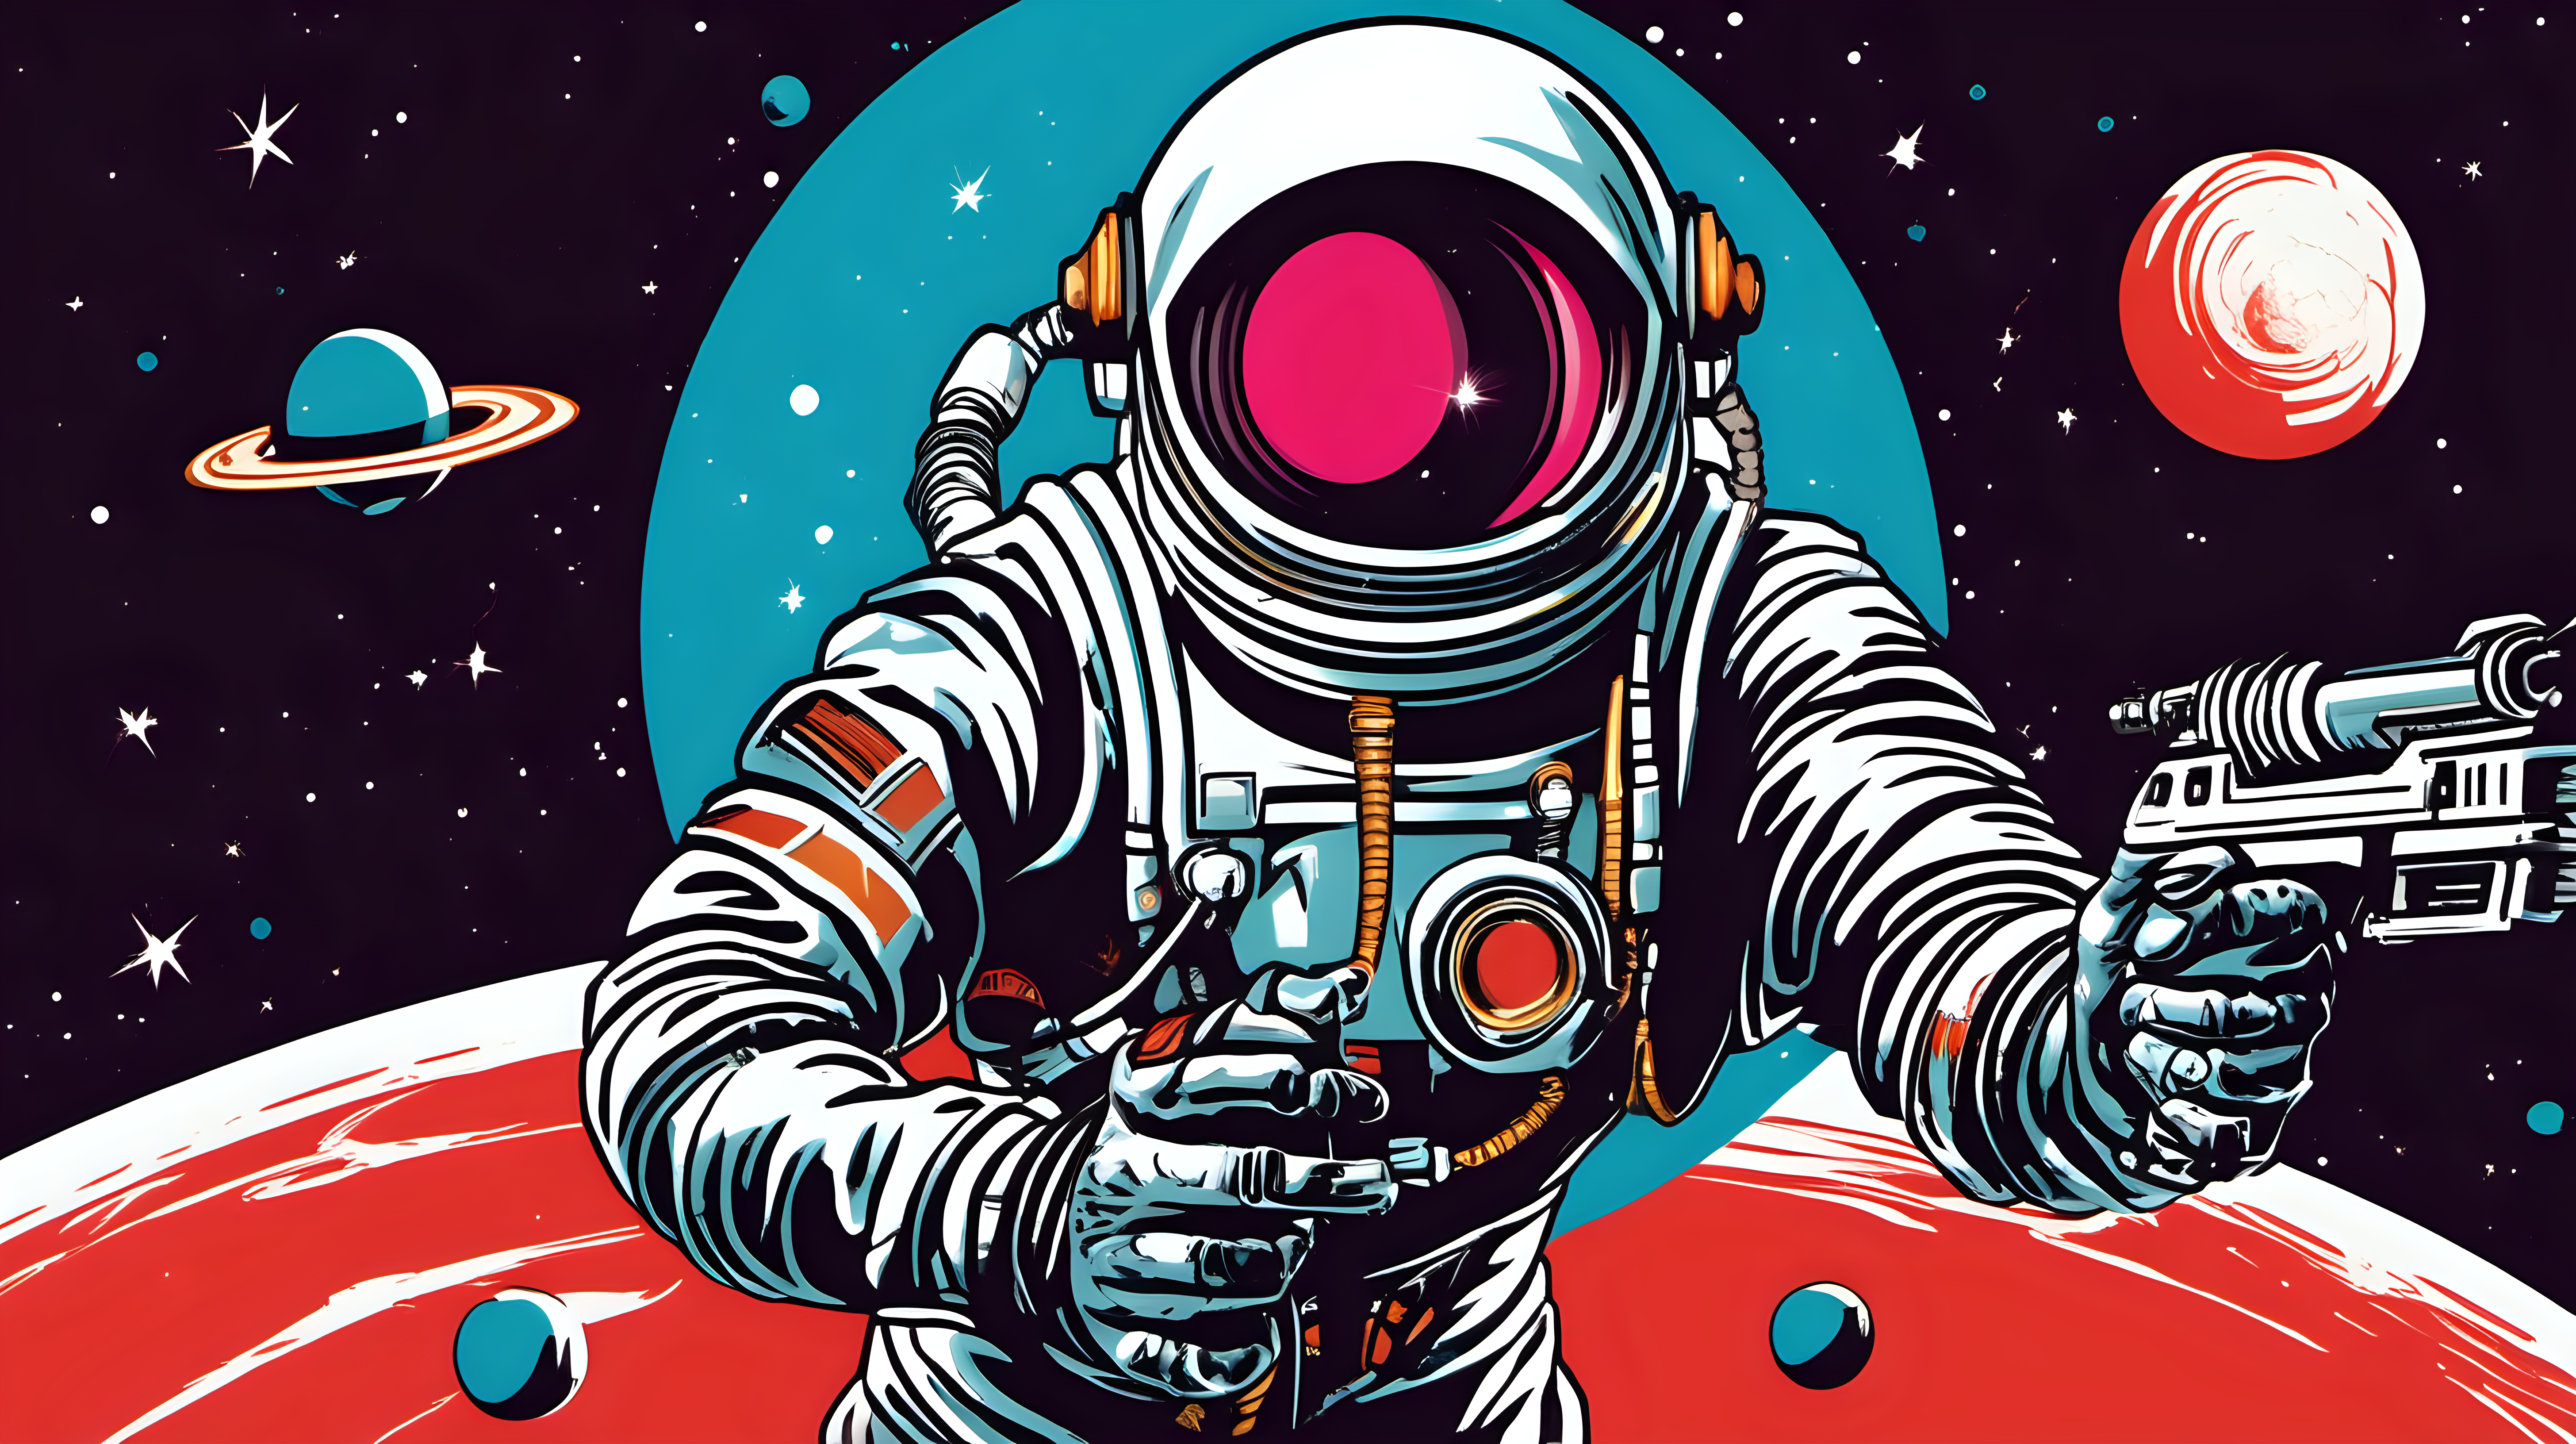 A 1950's-era science fiction spaceman floating in space, holding a laser gun, a ringed planet behind him. Pop Art style.